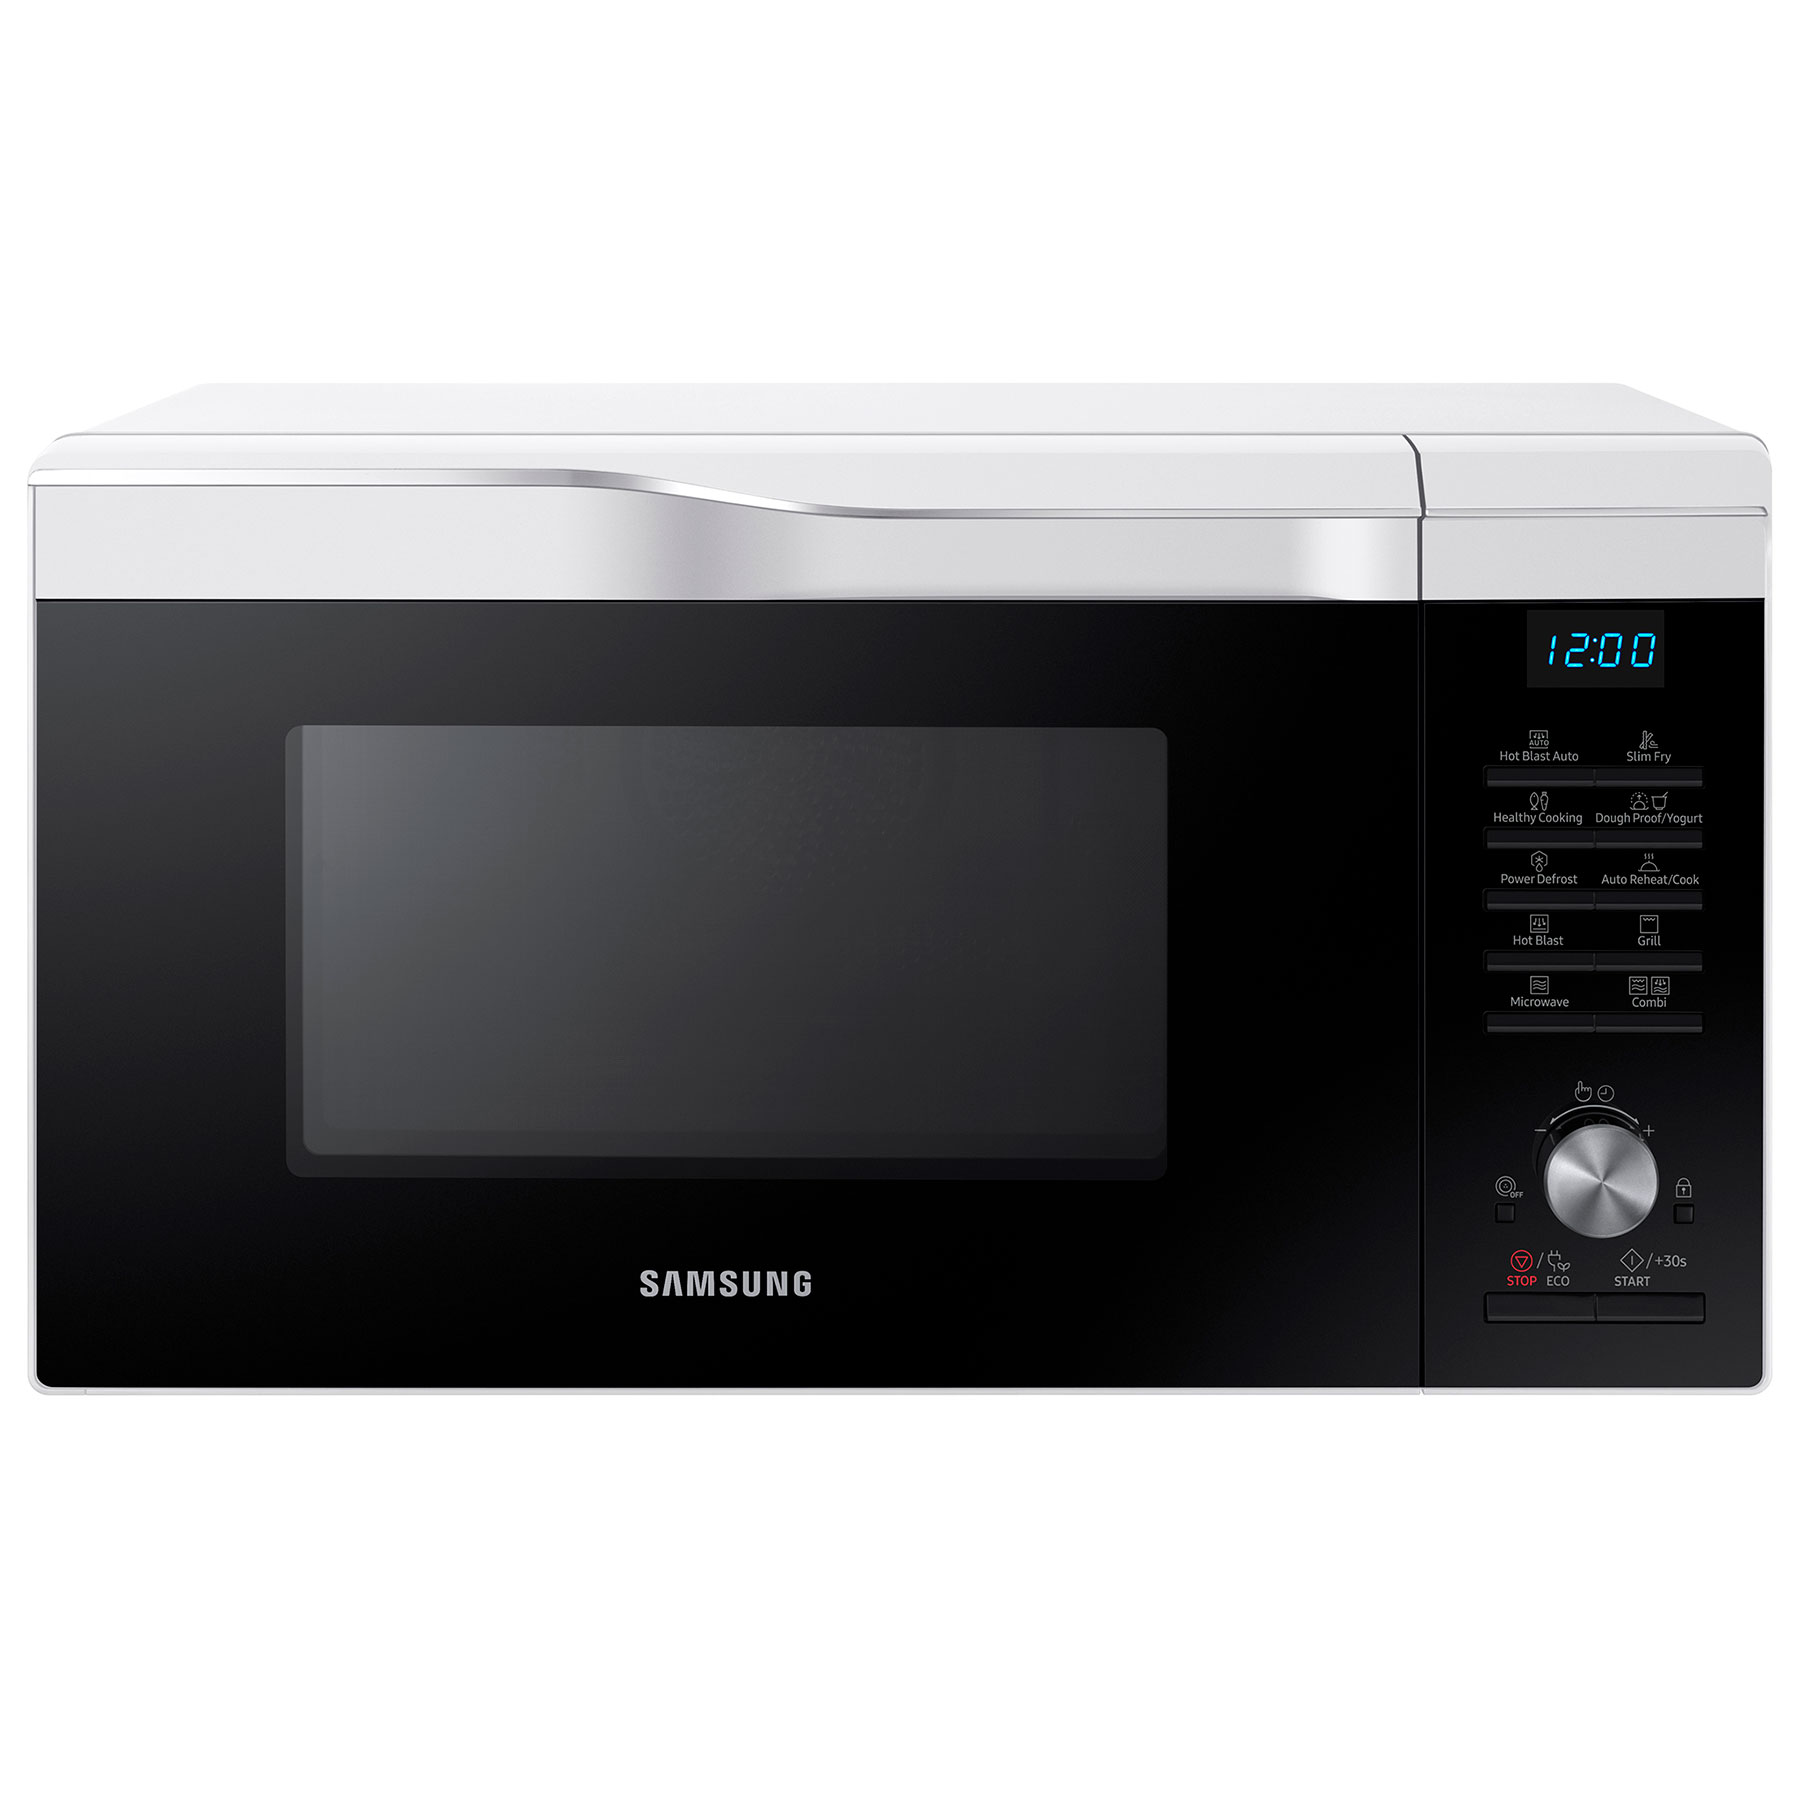 Image of Samsung MC28M6055CW Combination Microwave Oven in White 28 Litre 900W